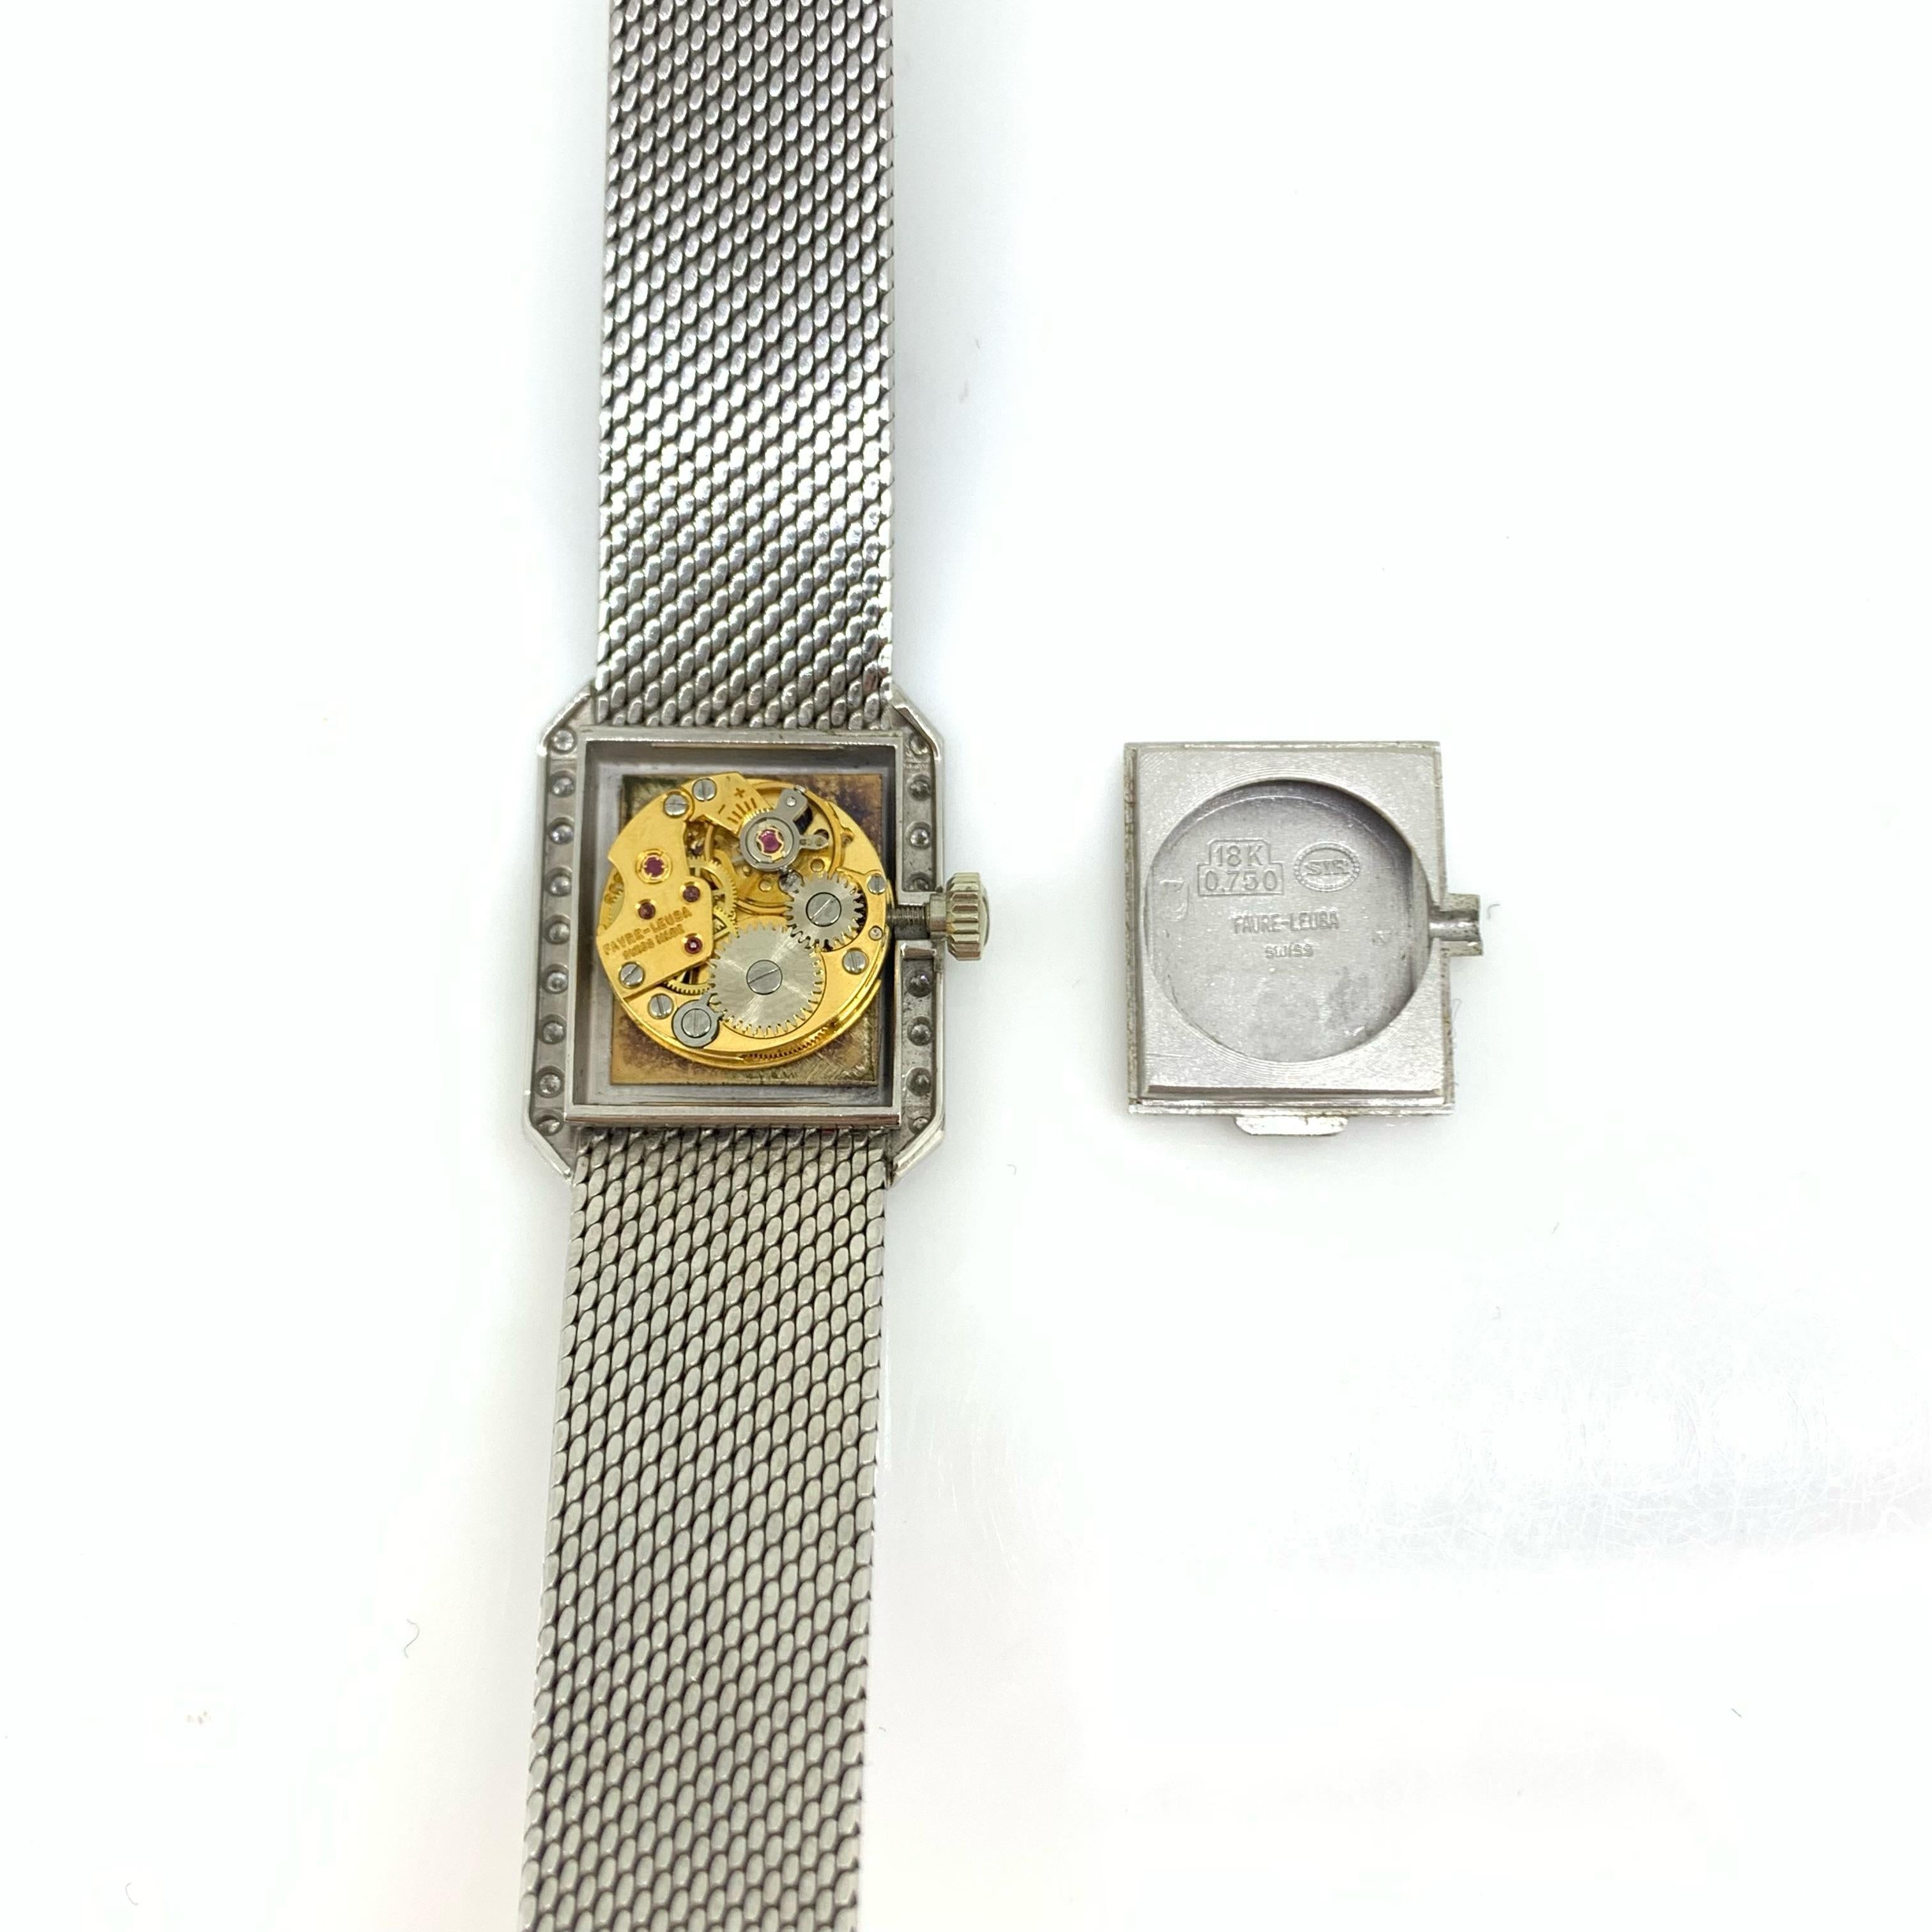 Favre Leuba Lady Diamond White Gold Manual Wind Wristwatch In Good Condition For Sale In London, GB